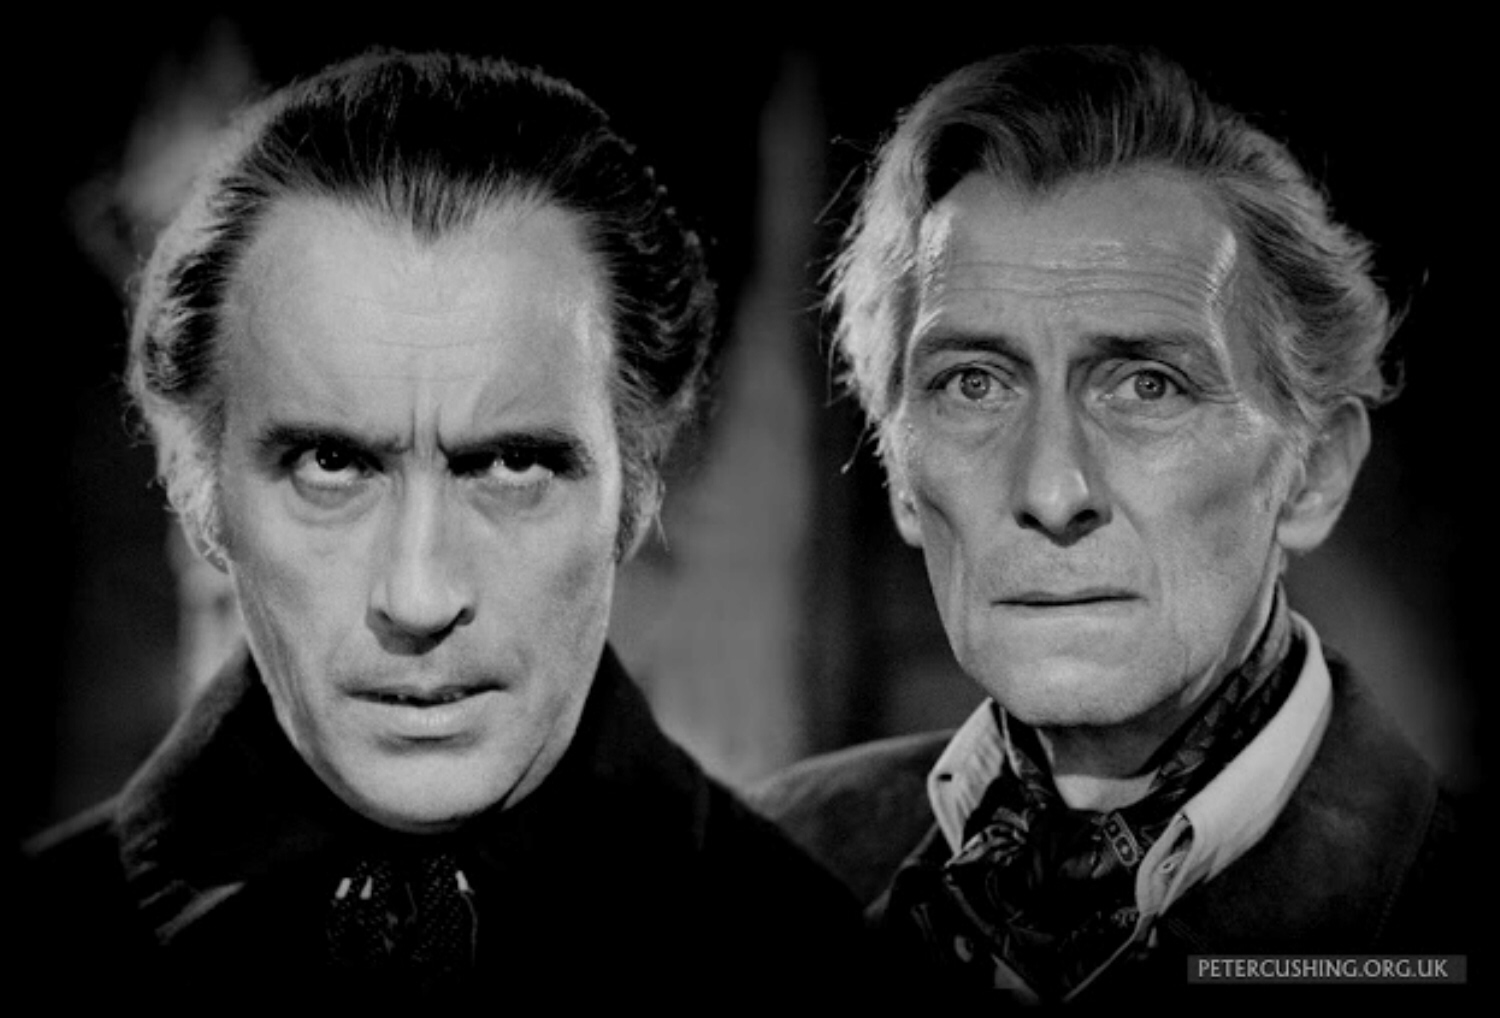 Supernatural Sci-Fi Team Christopher Lee and Peter Cushing | spiropictures